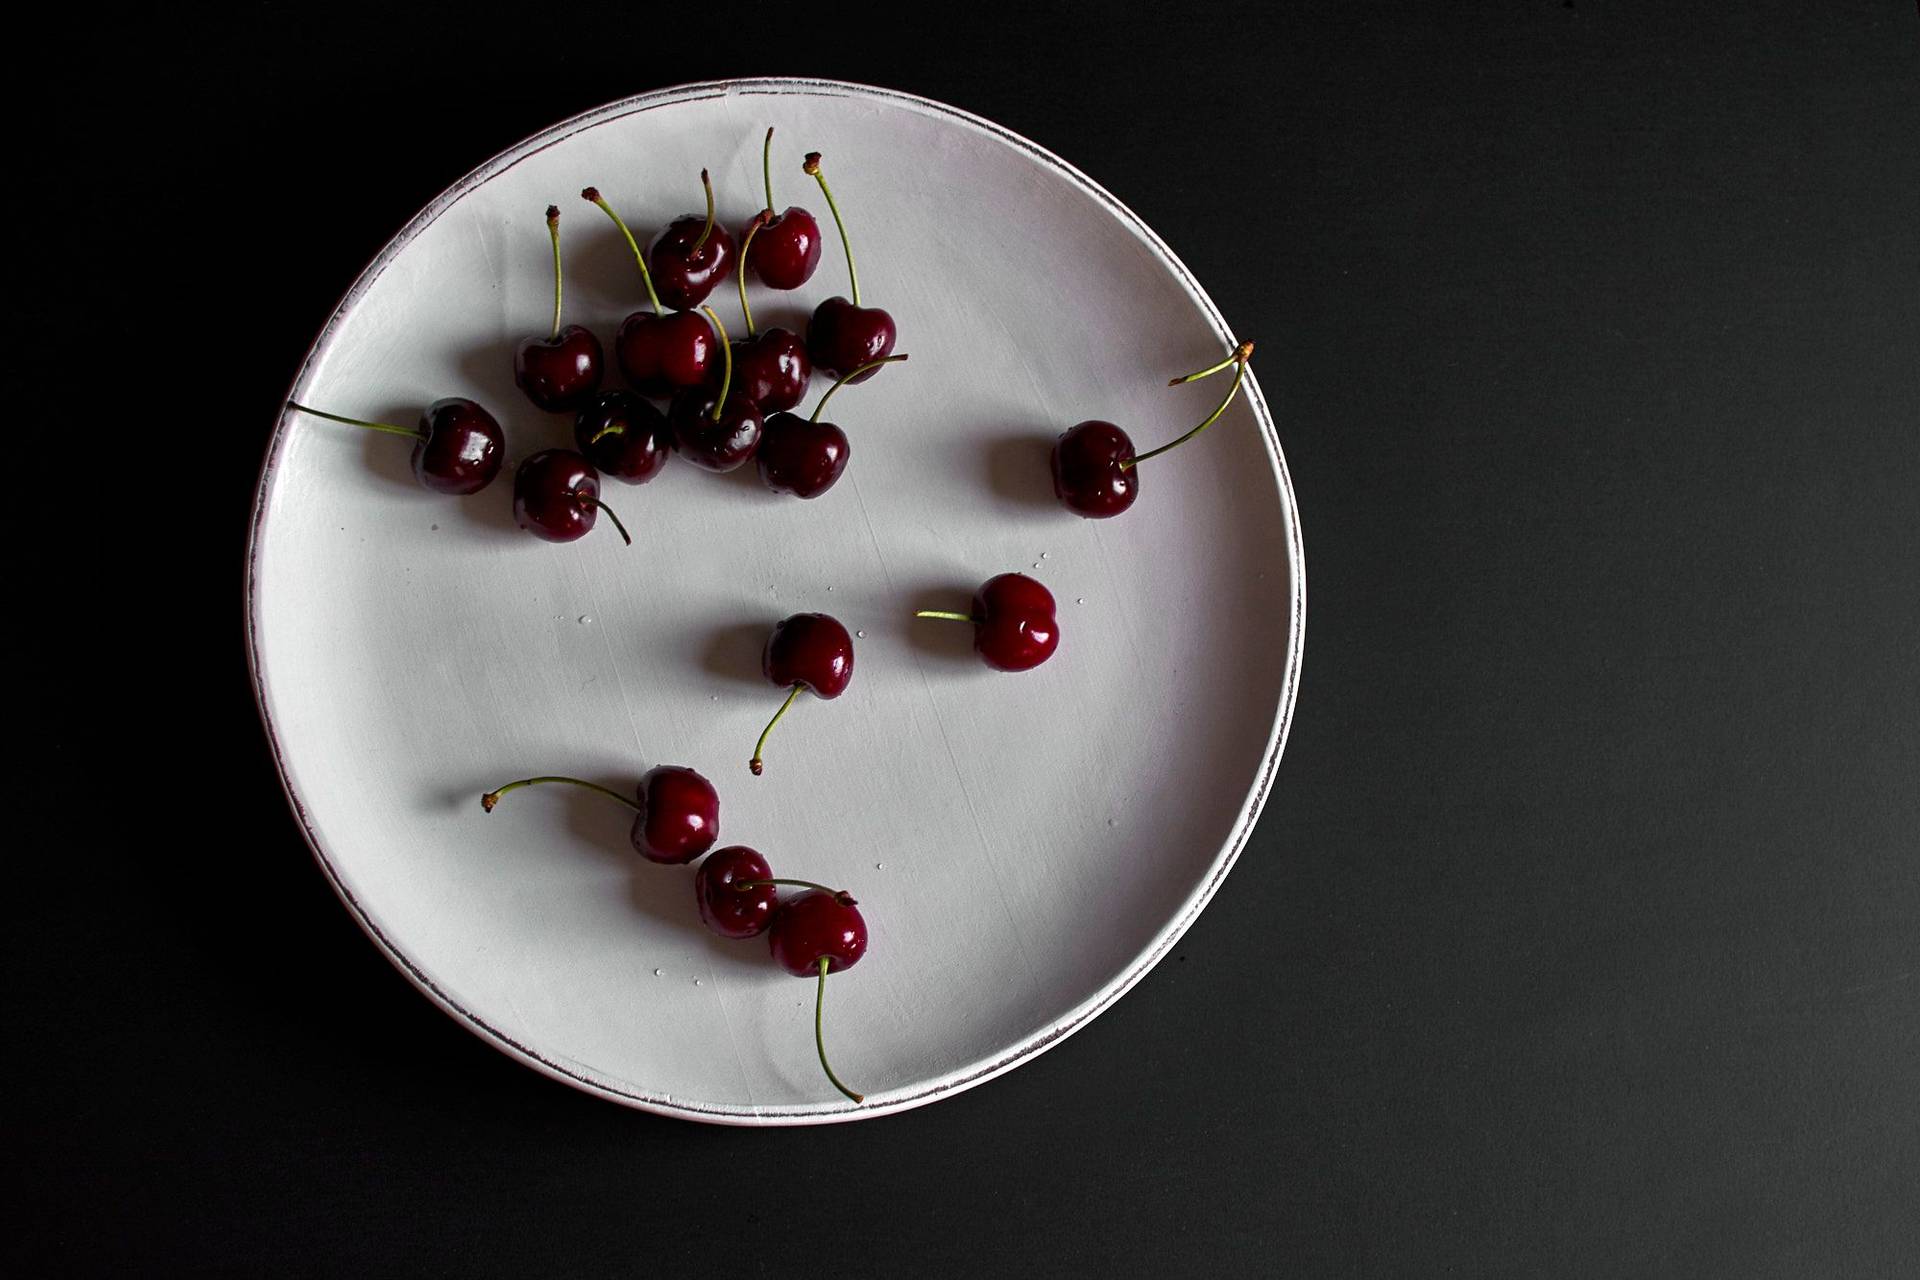 cherries on a white plate with black background